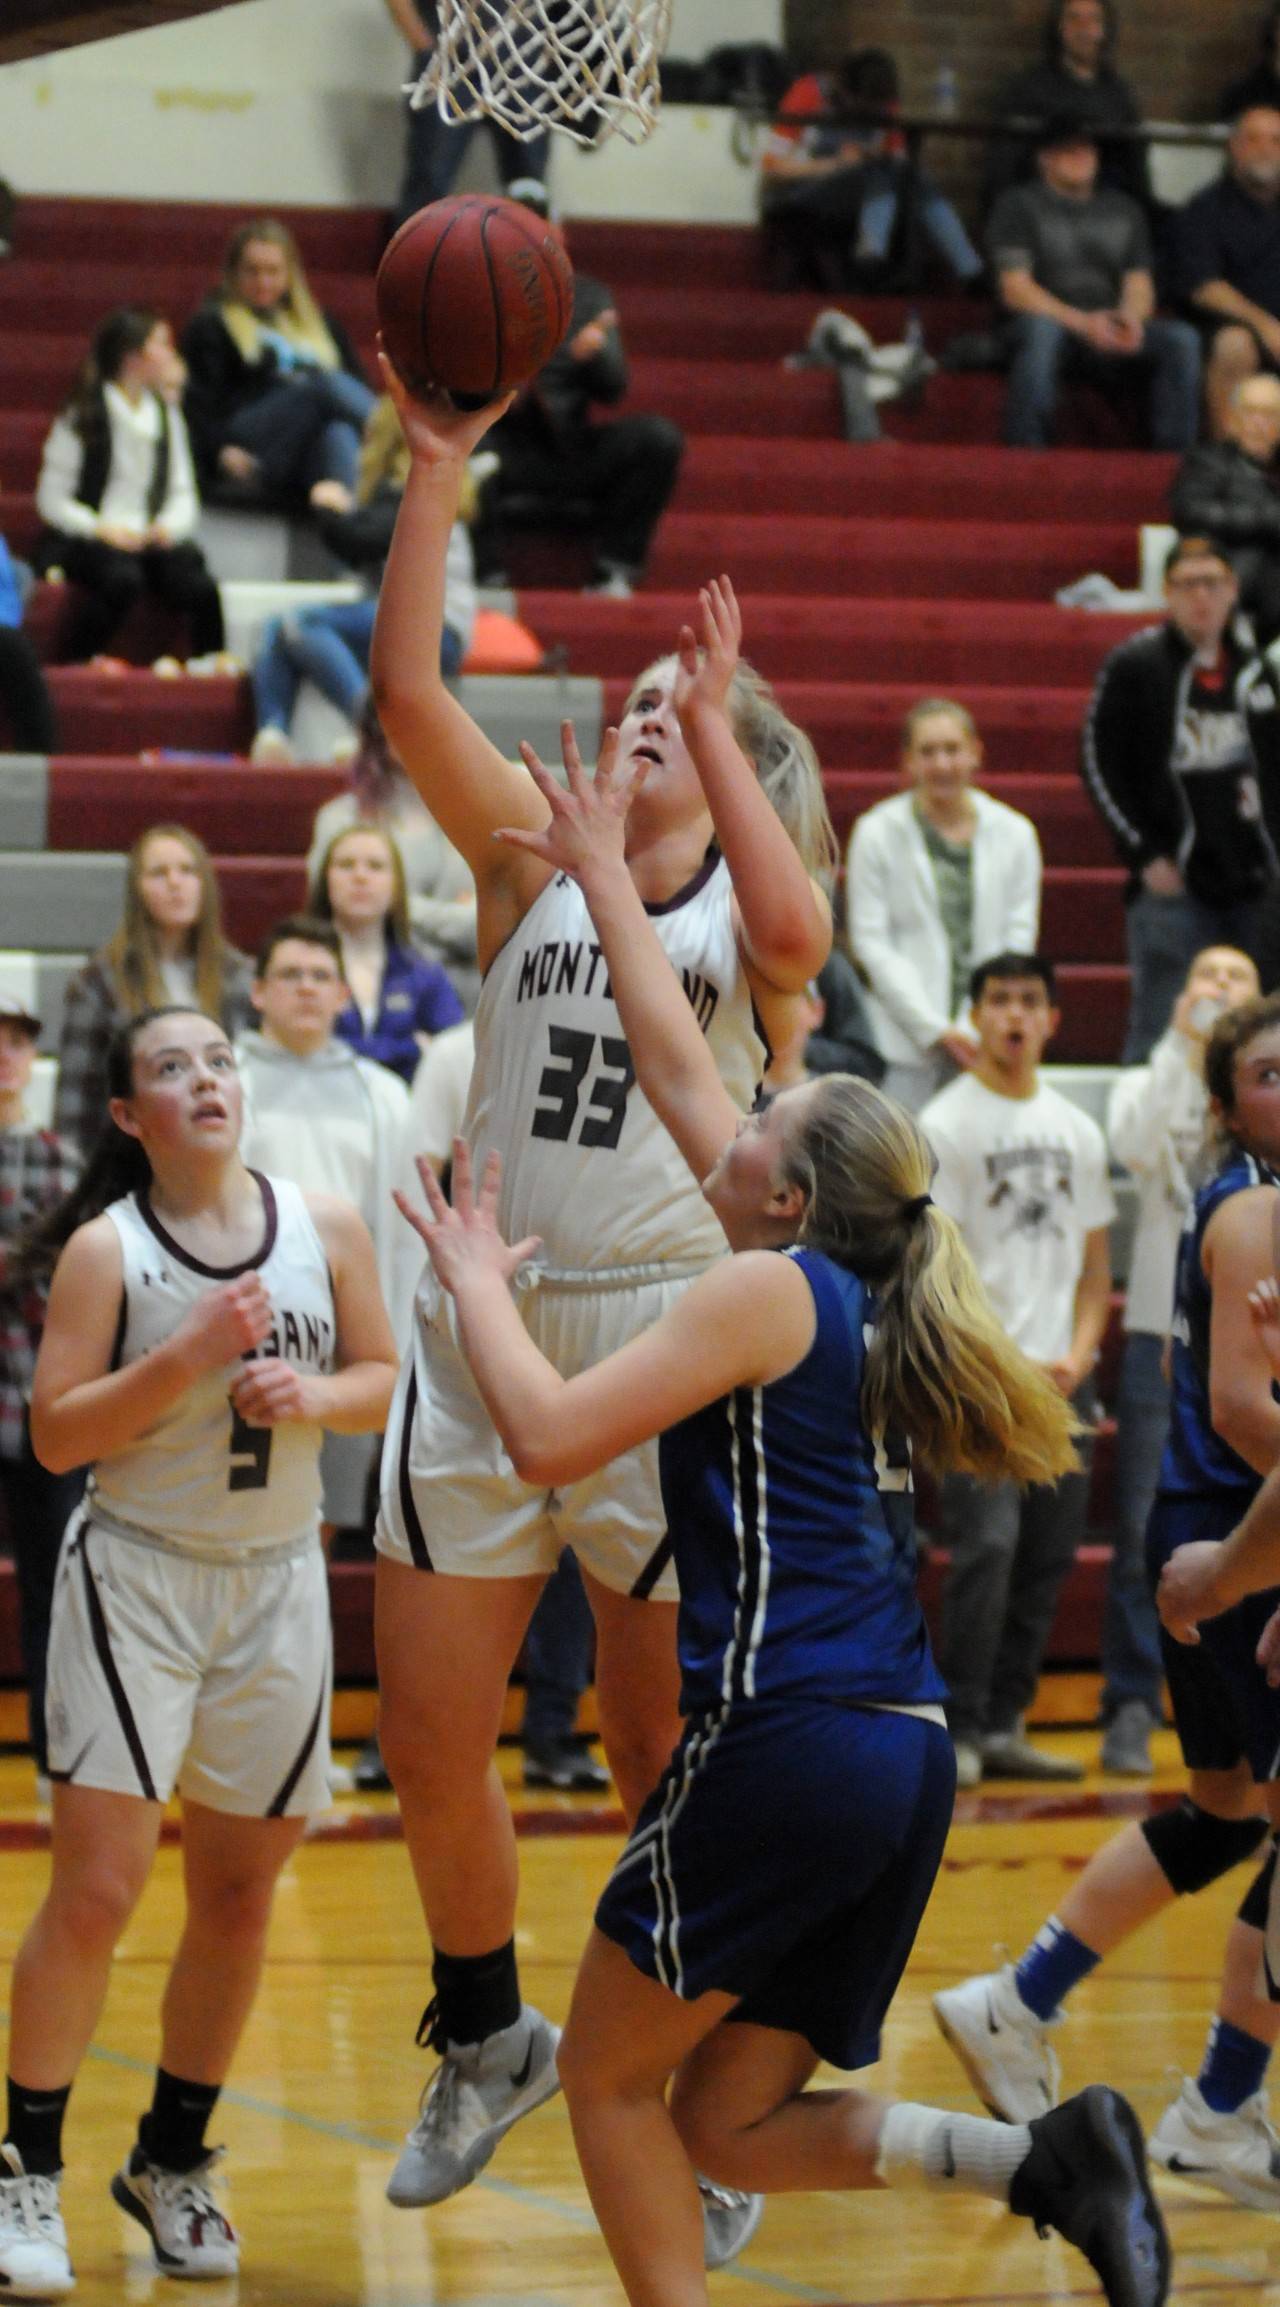 Montesano’s Zoe Hutchings (33) scores during the second half of Elma’s 60-52 victory over Montesano on Friday in Montesano. (Ryan Sparks | Grays Harbor News Group)